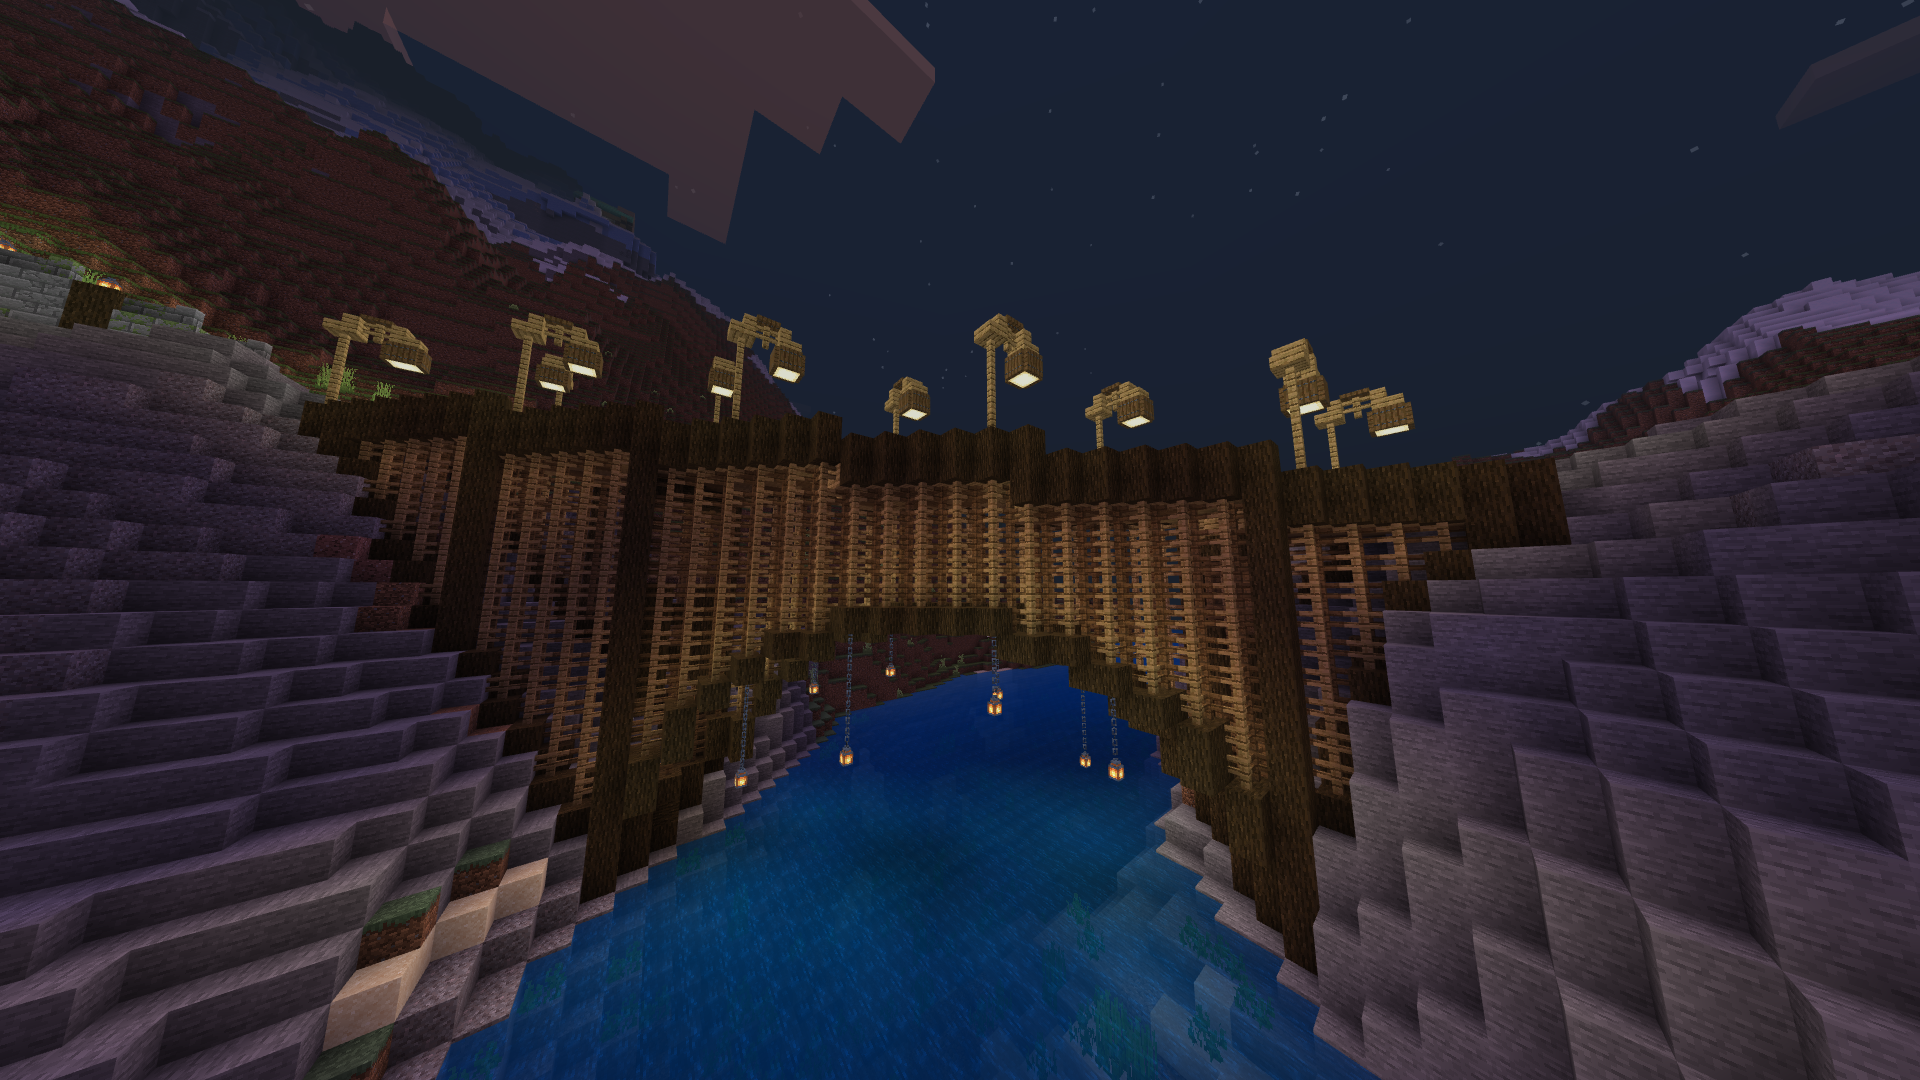 A bridge depicted in Minecraft lined with streetlamps